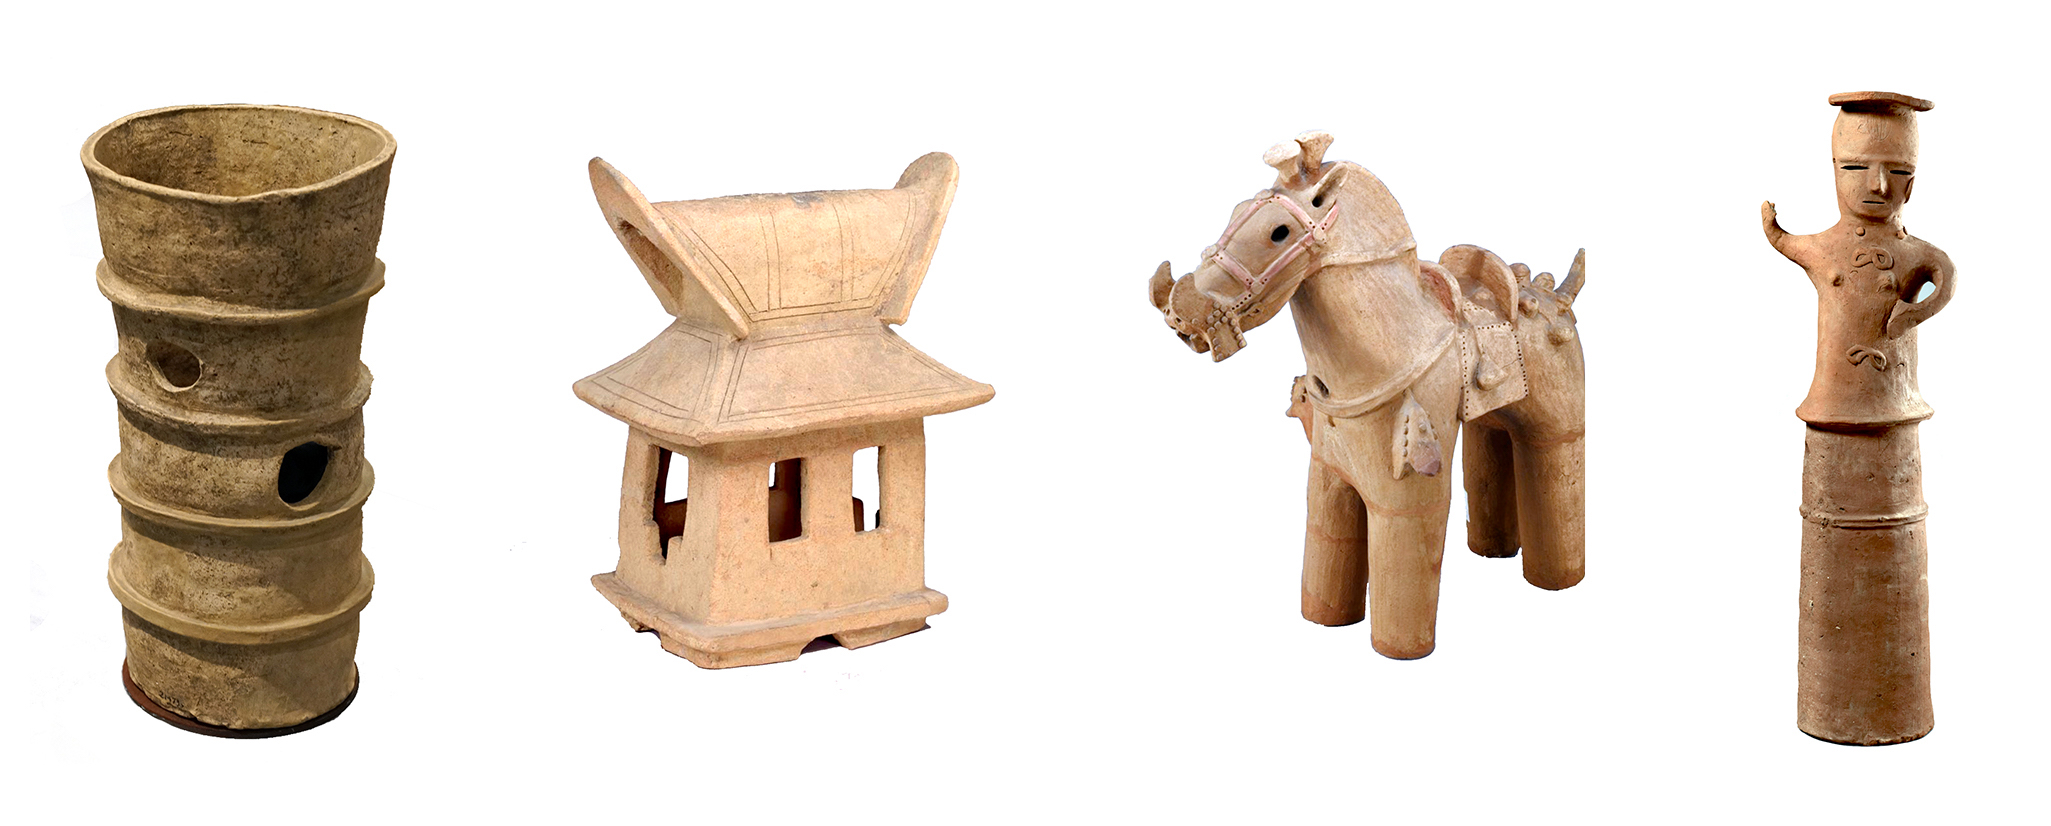 Haniwa. From left to right: Cylindrical haniwa, 5th century, Japan, excavated in Kaga-shi, Ishikawa, earthenware (Tokyo National Museum, image: Steven Zucker); haniwa house with gabled roof, 5th century, Japan, excavated in Sakura-shi, Nara, earthenware (Tokyo National Museum); haniwa horse, 5th-6th century, Japan, earthenware, partially restored, H. 94 cm (Tokyo National Museum); haniwa of a female shrine attendant, 6th-7th century, Japan, earthenware, H. 88.9 cm (Yale University Art Gallery)